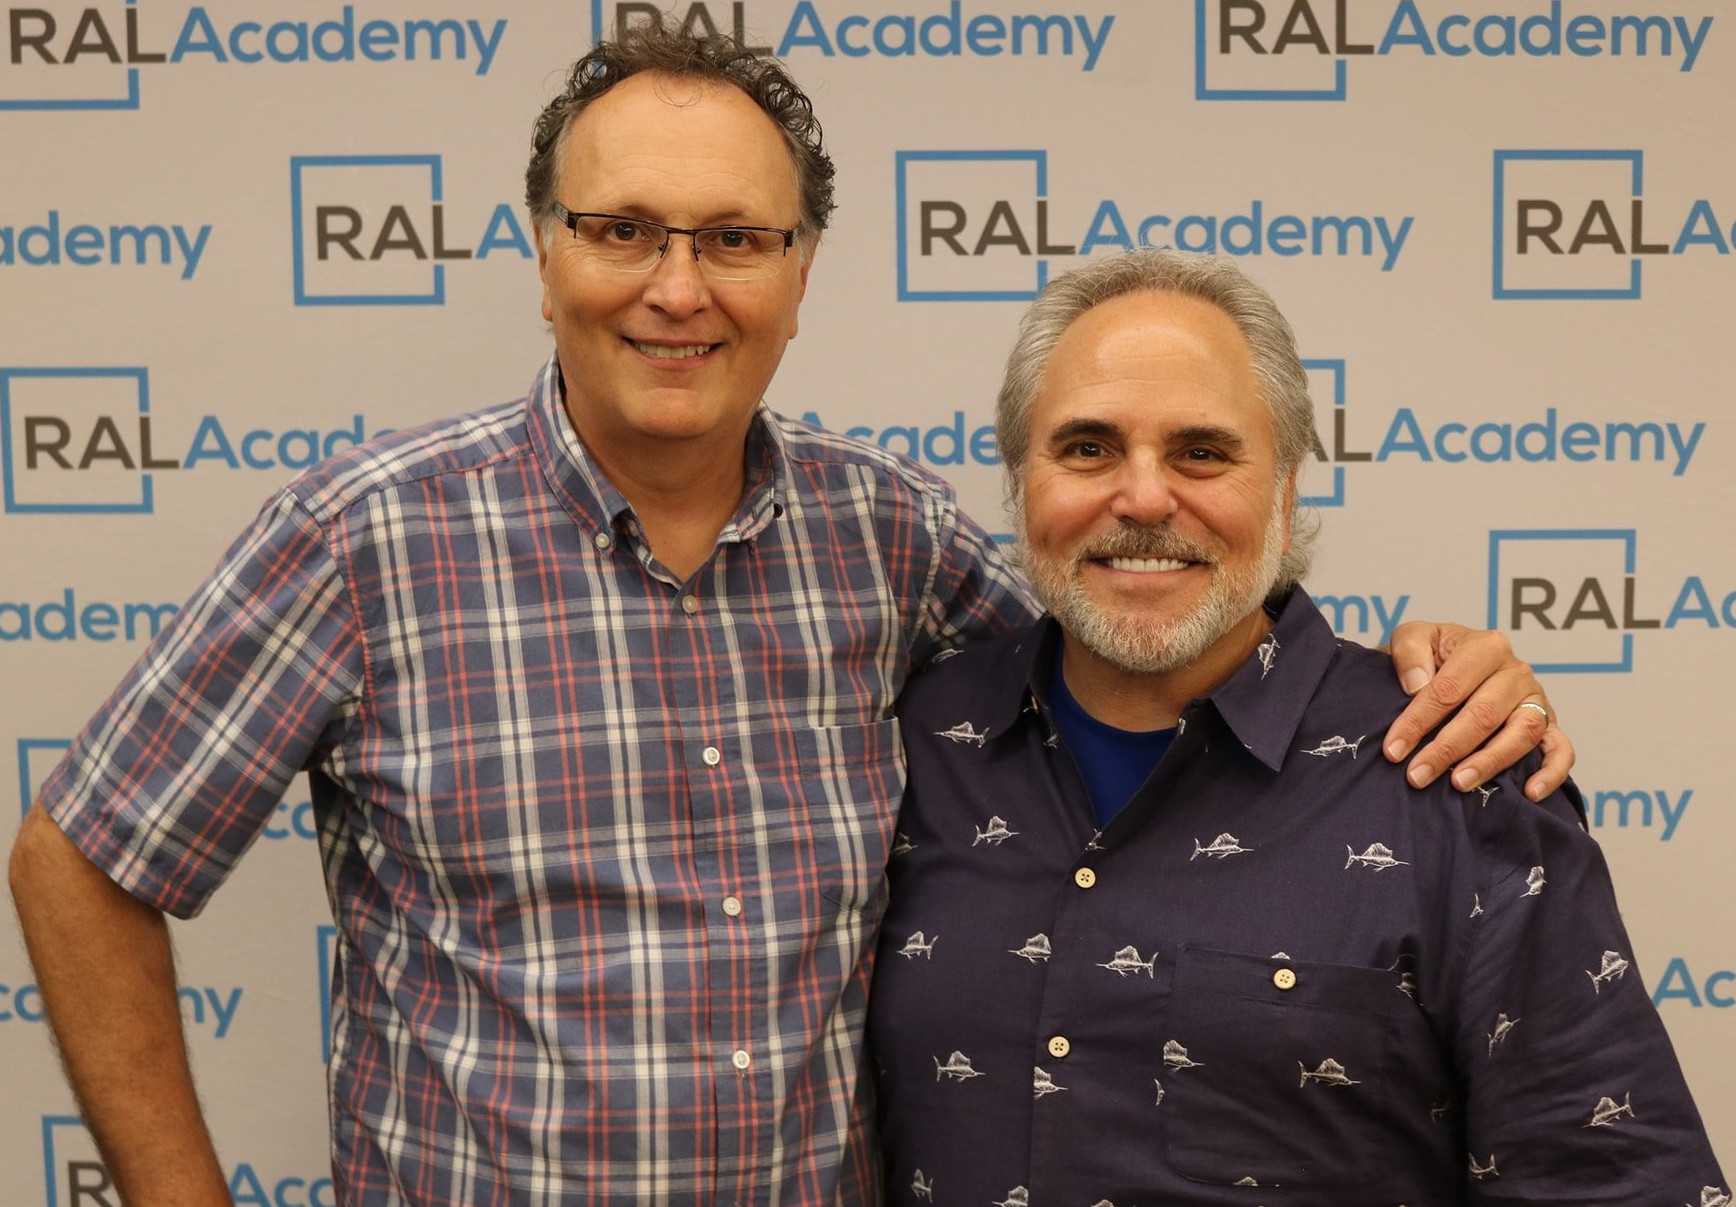 Rick Miller and Gene Guarino at a RAL Acadamy event